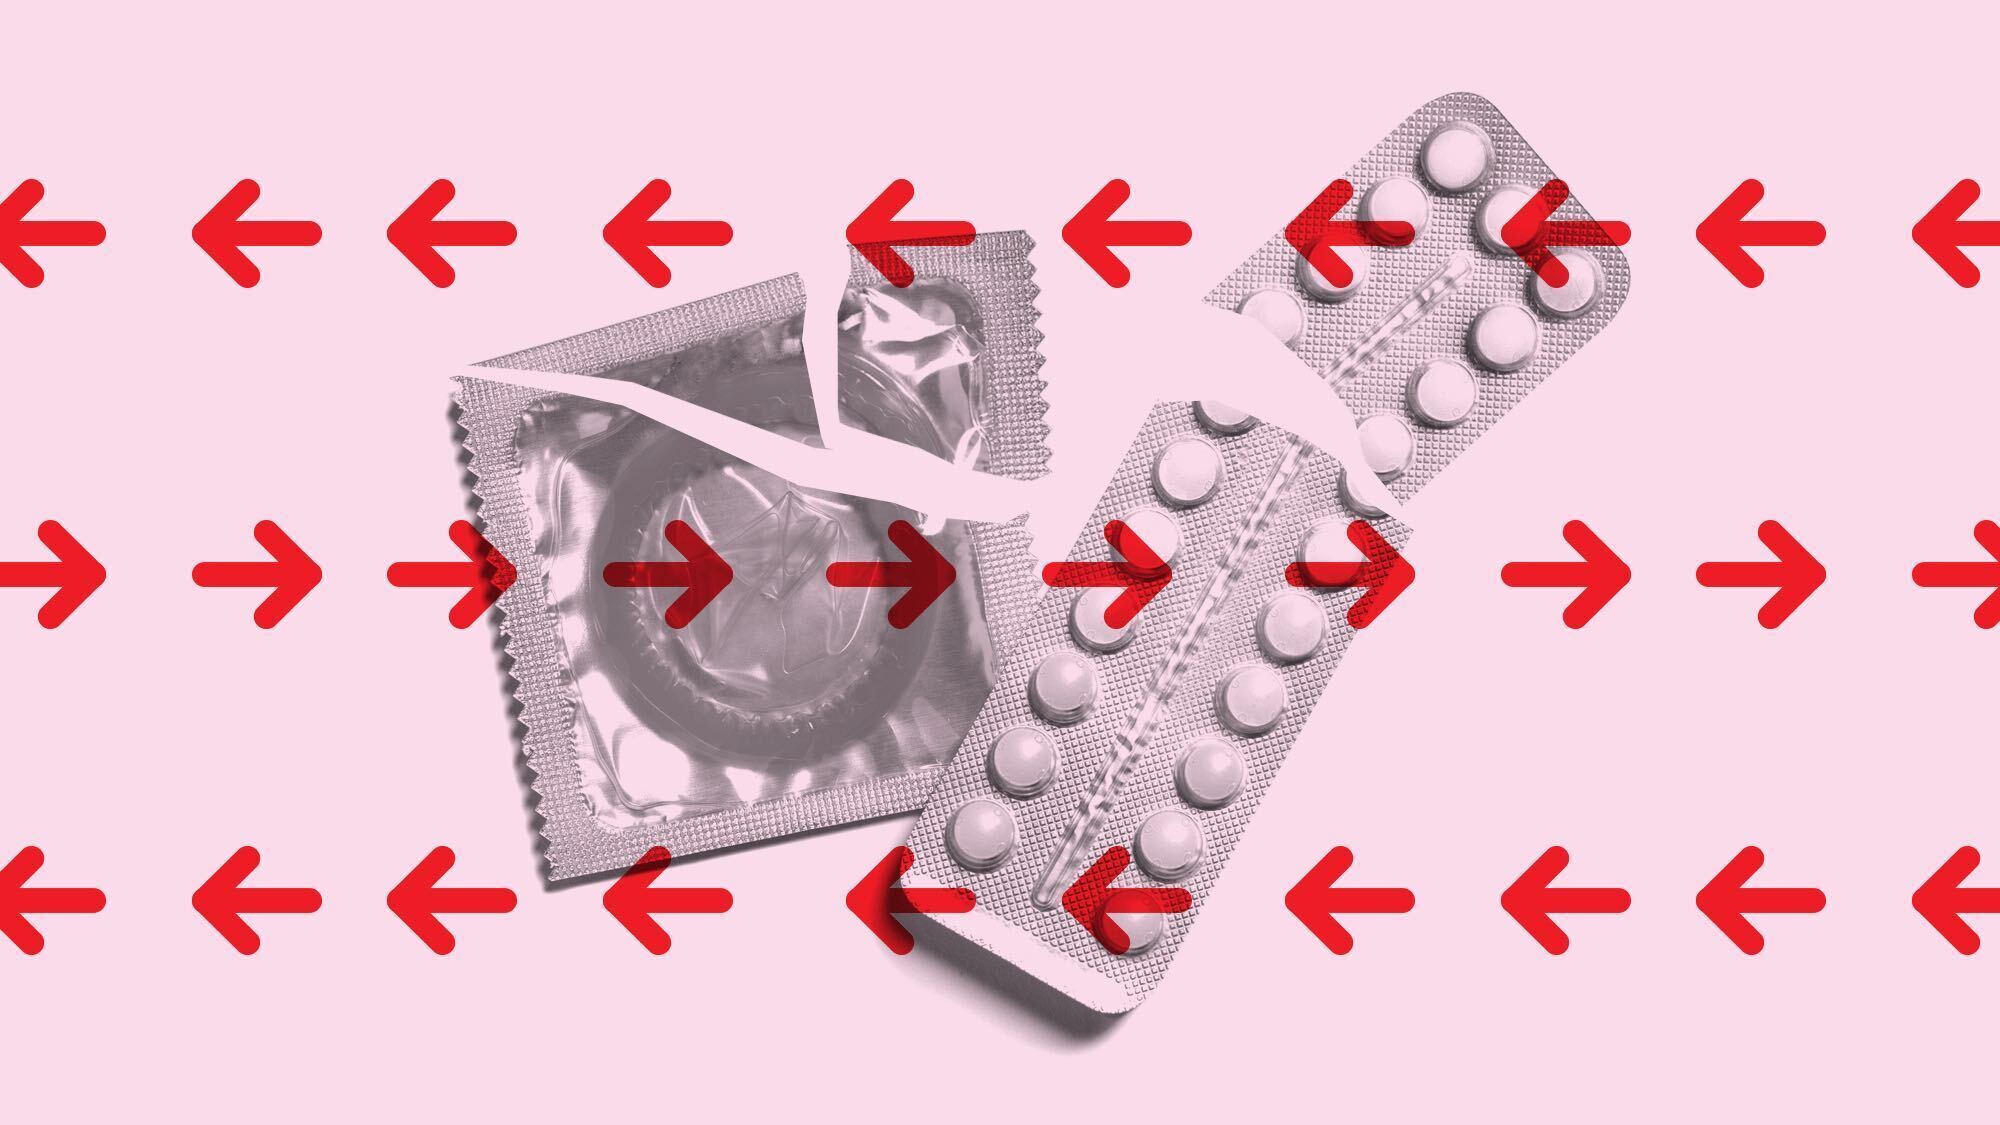 Birth control tablets and condom, red arrows in both directions